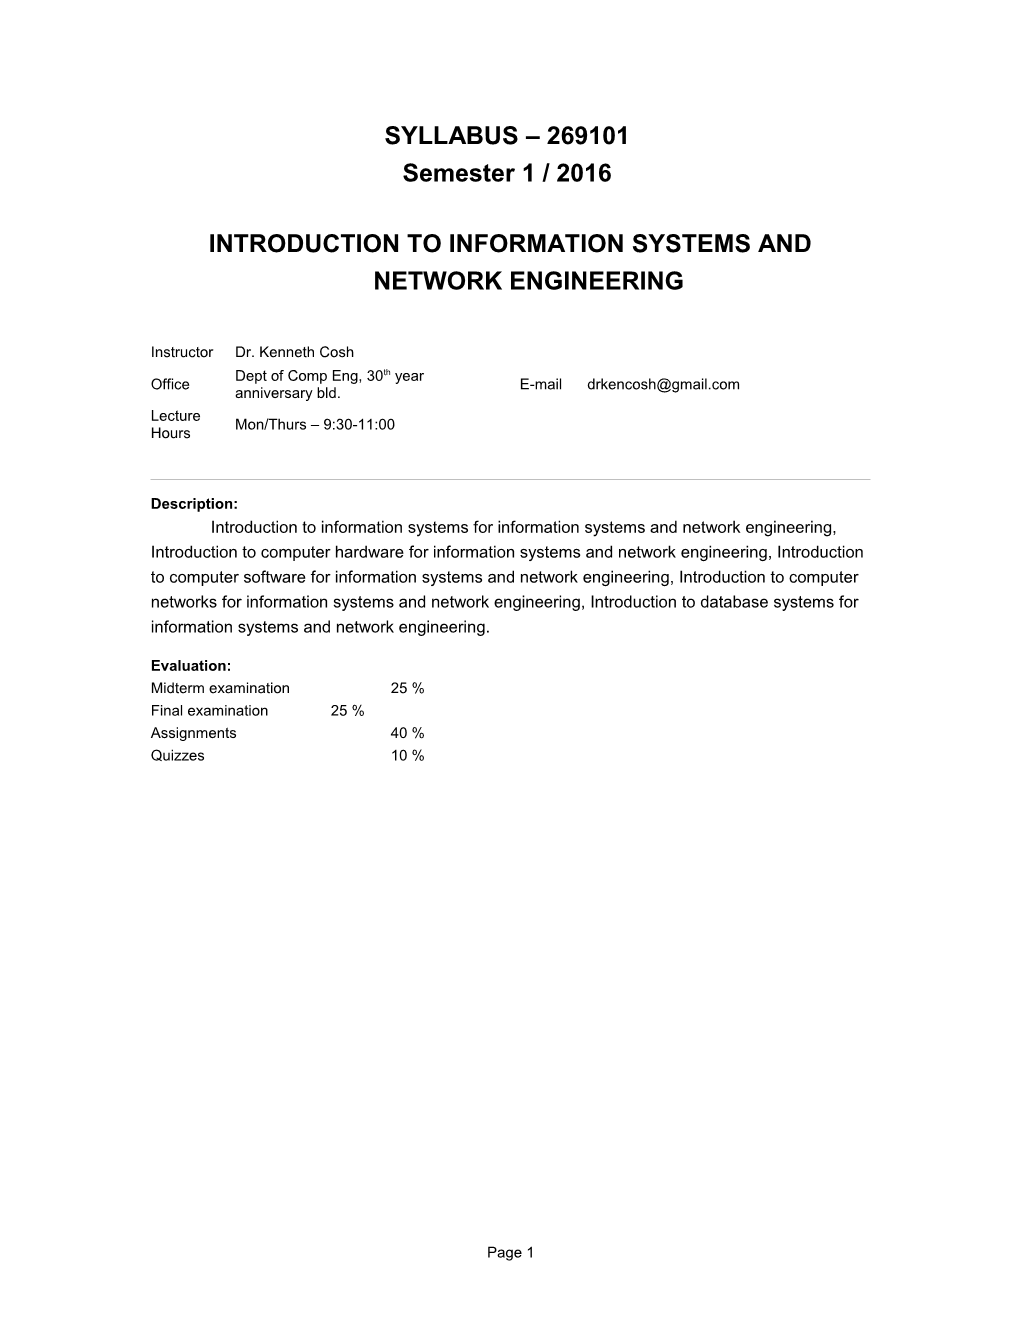 Introduction to Information Systems and Network Engineering